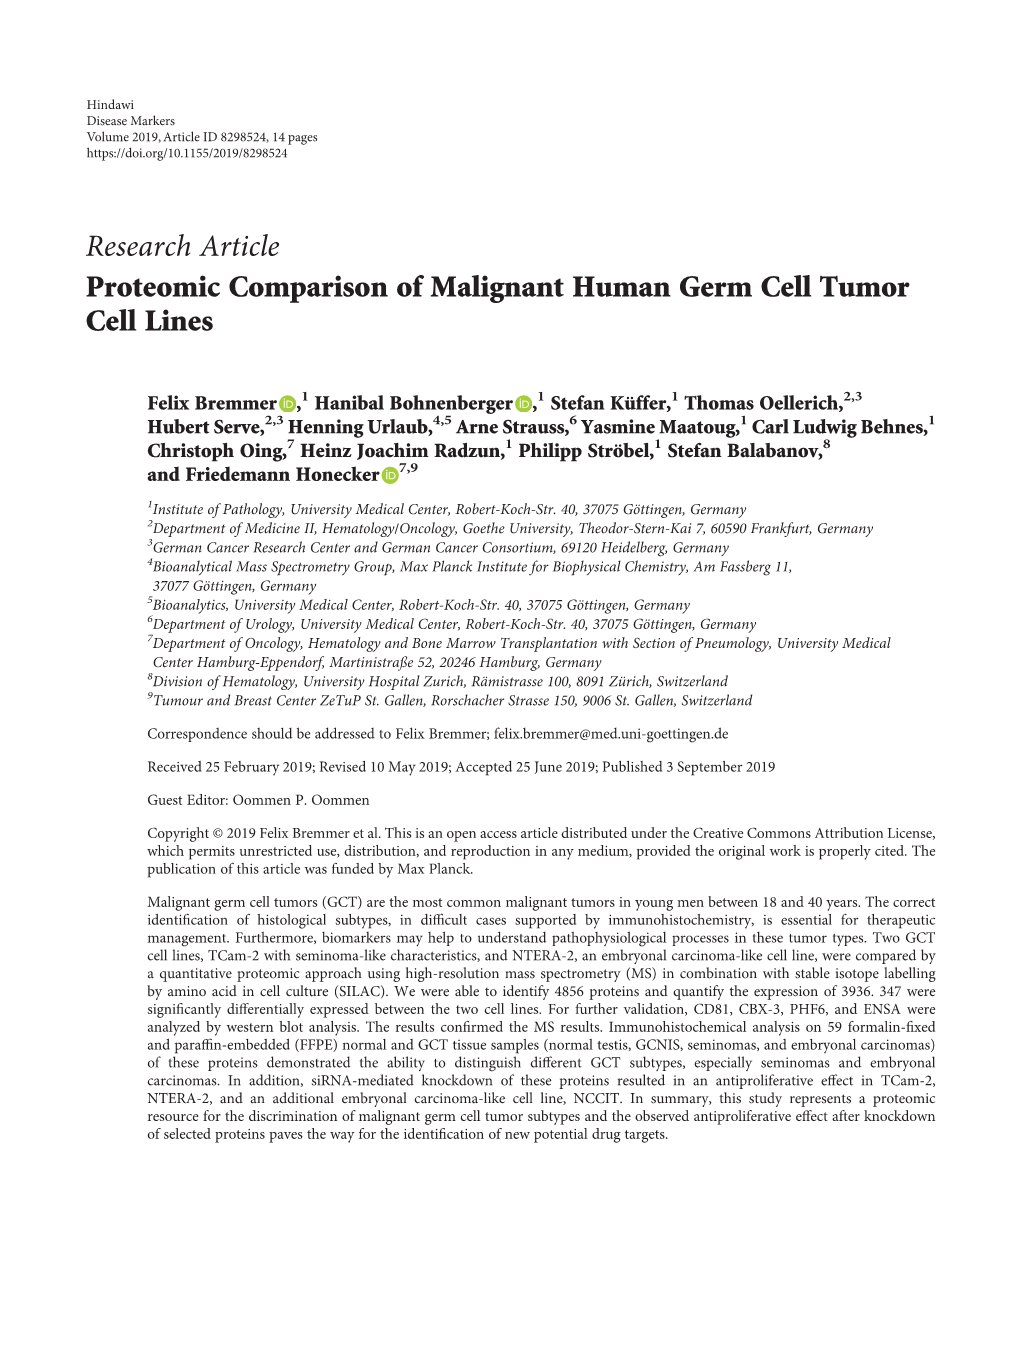 Research Article Proteomic Comparison of Malignant Human Germ Cell Tumor Cell Lines